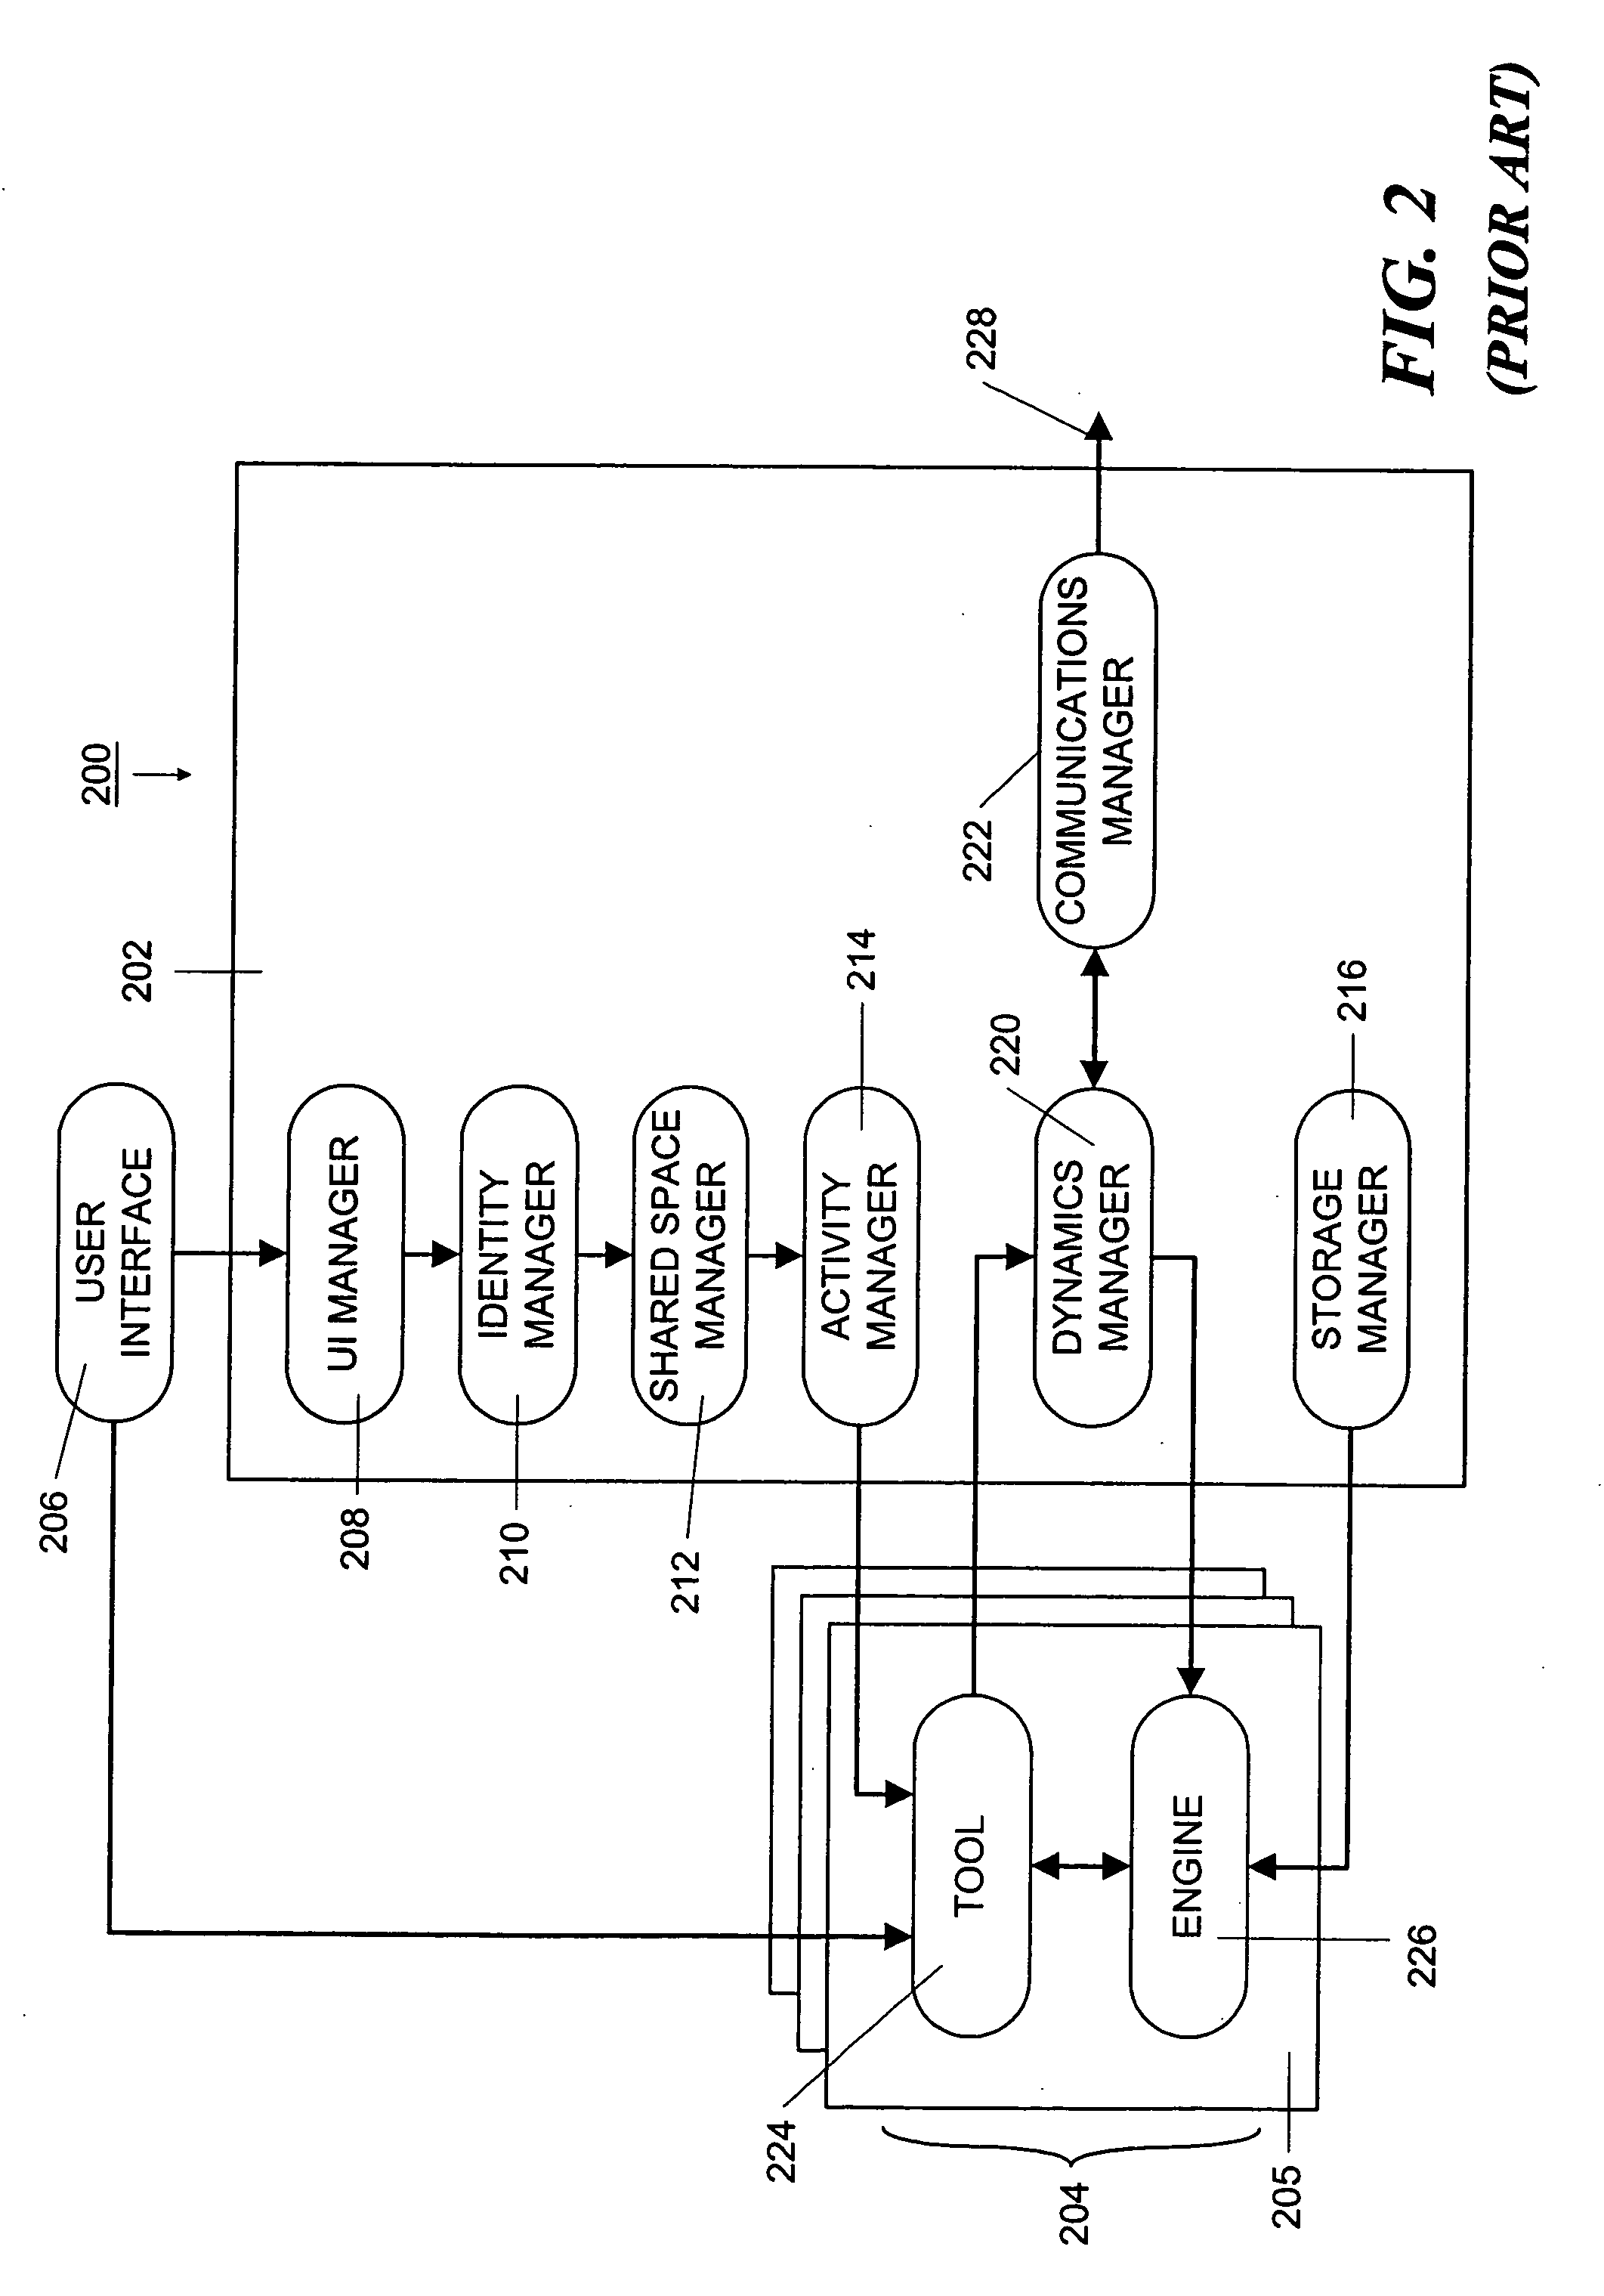 Method and apparatus for connecting a secure peer-to-peer collaboration system to an external system